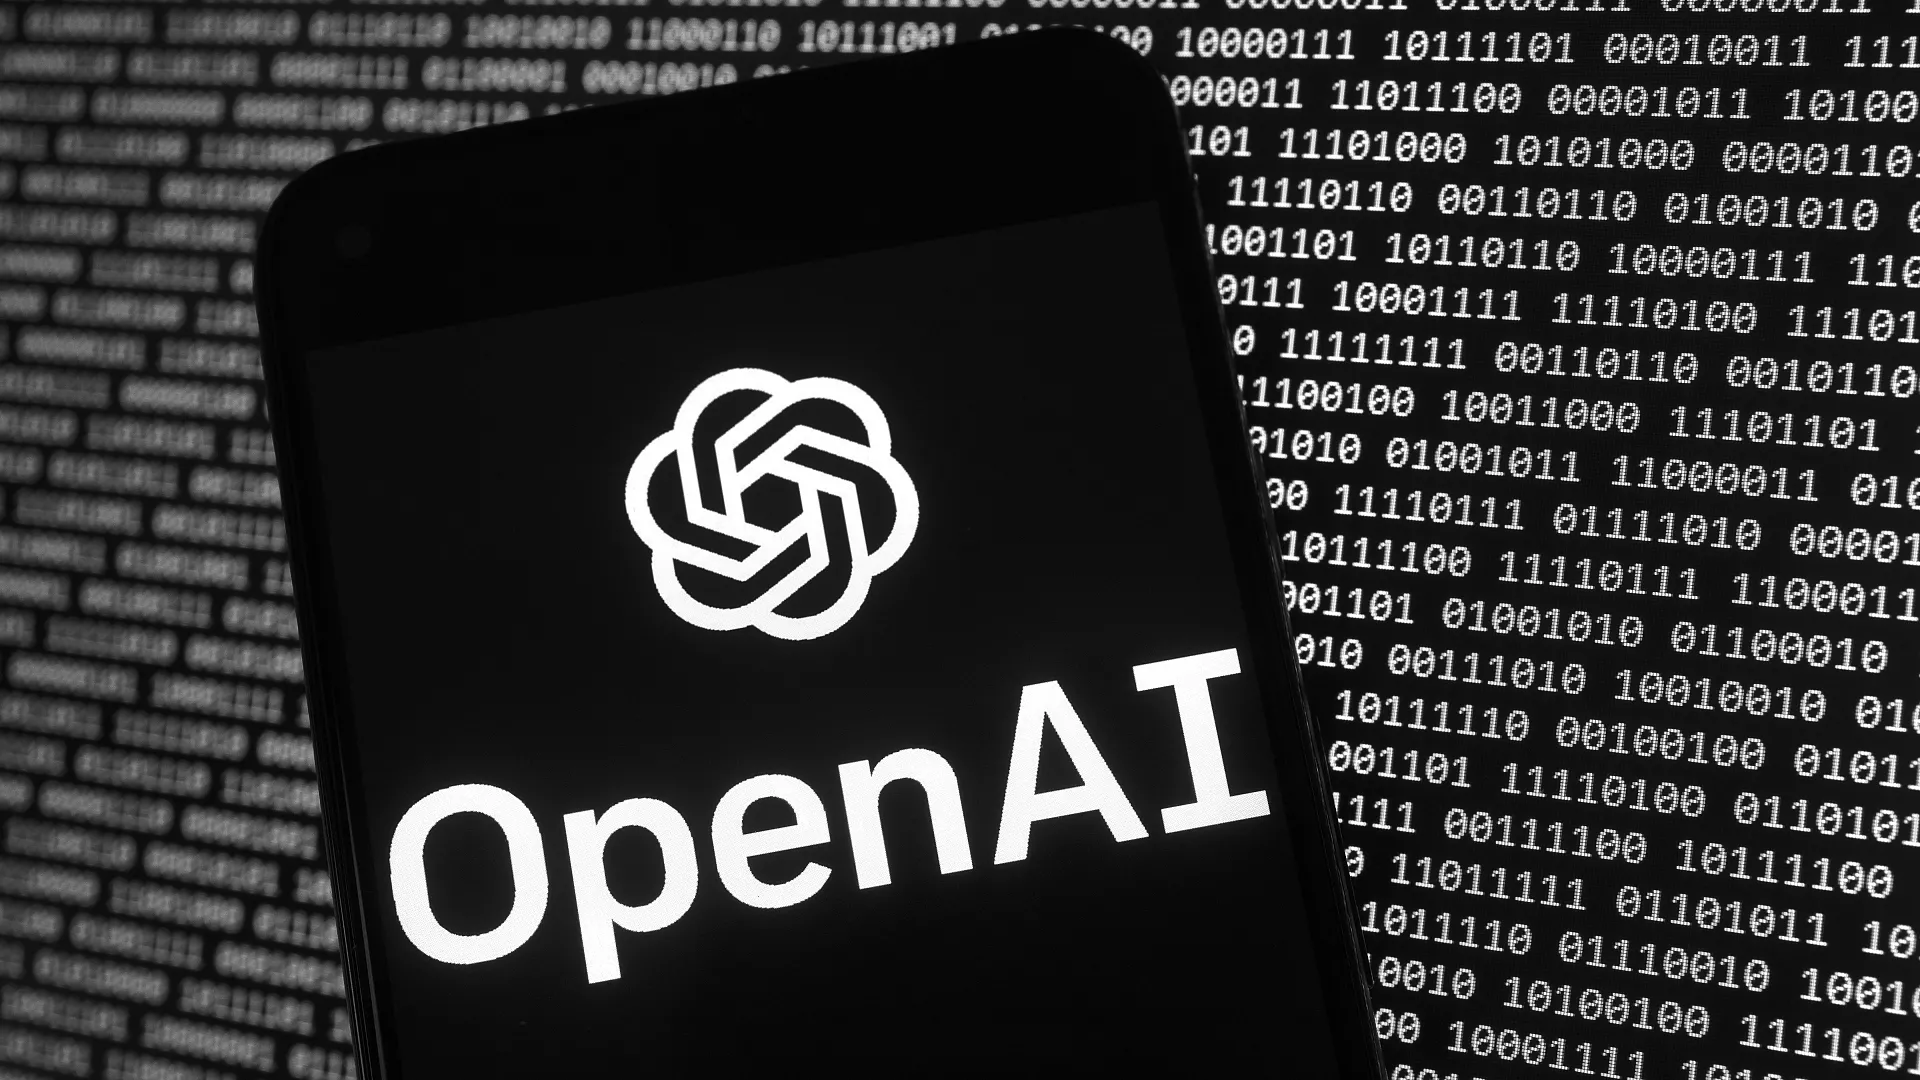 OpenAI unveils new AI model with eerily human voice assistant